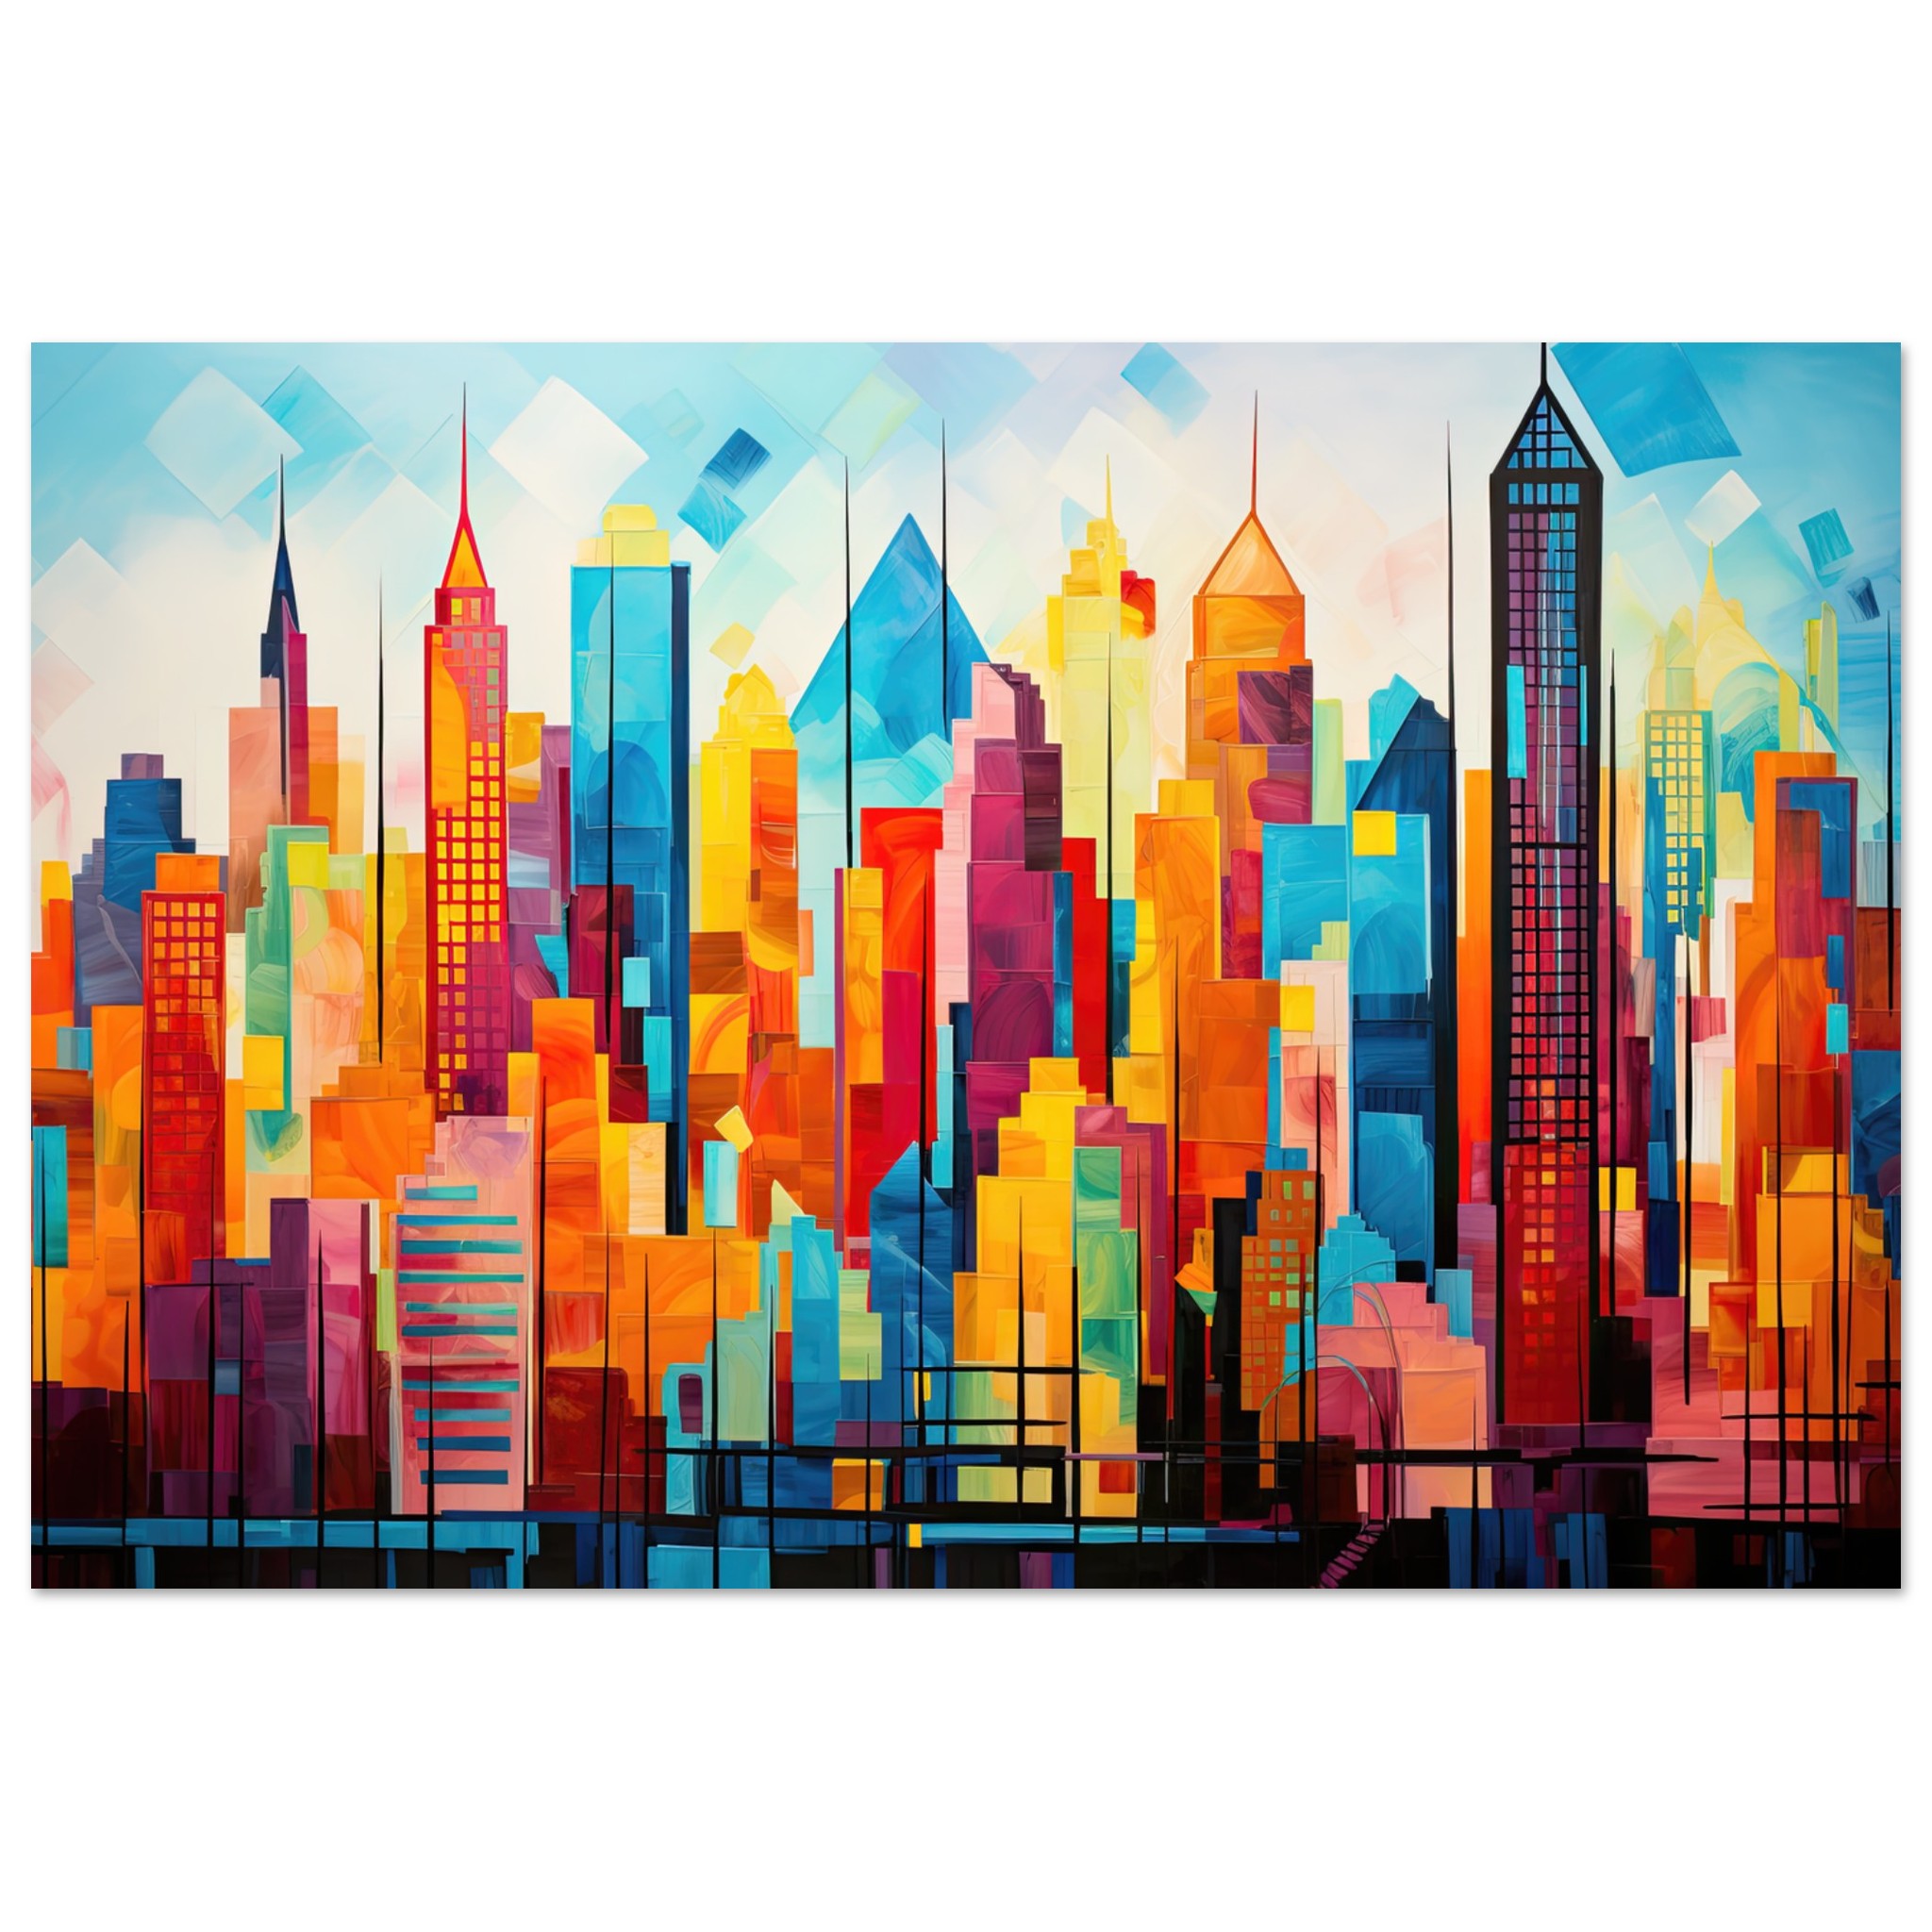 Colorful Abstract Cityscape Painted – Metal Print – 40×60 cm / 16×24″